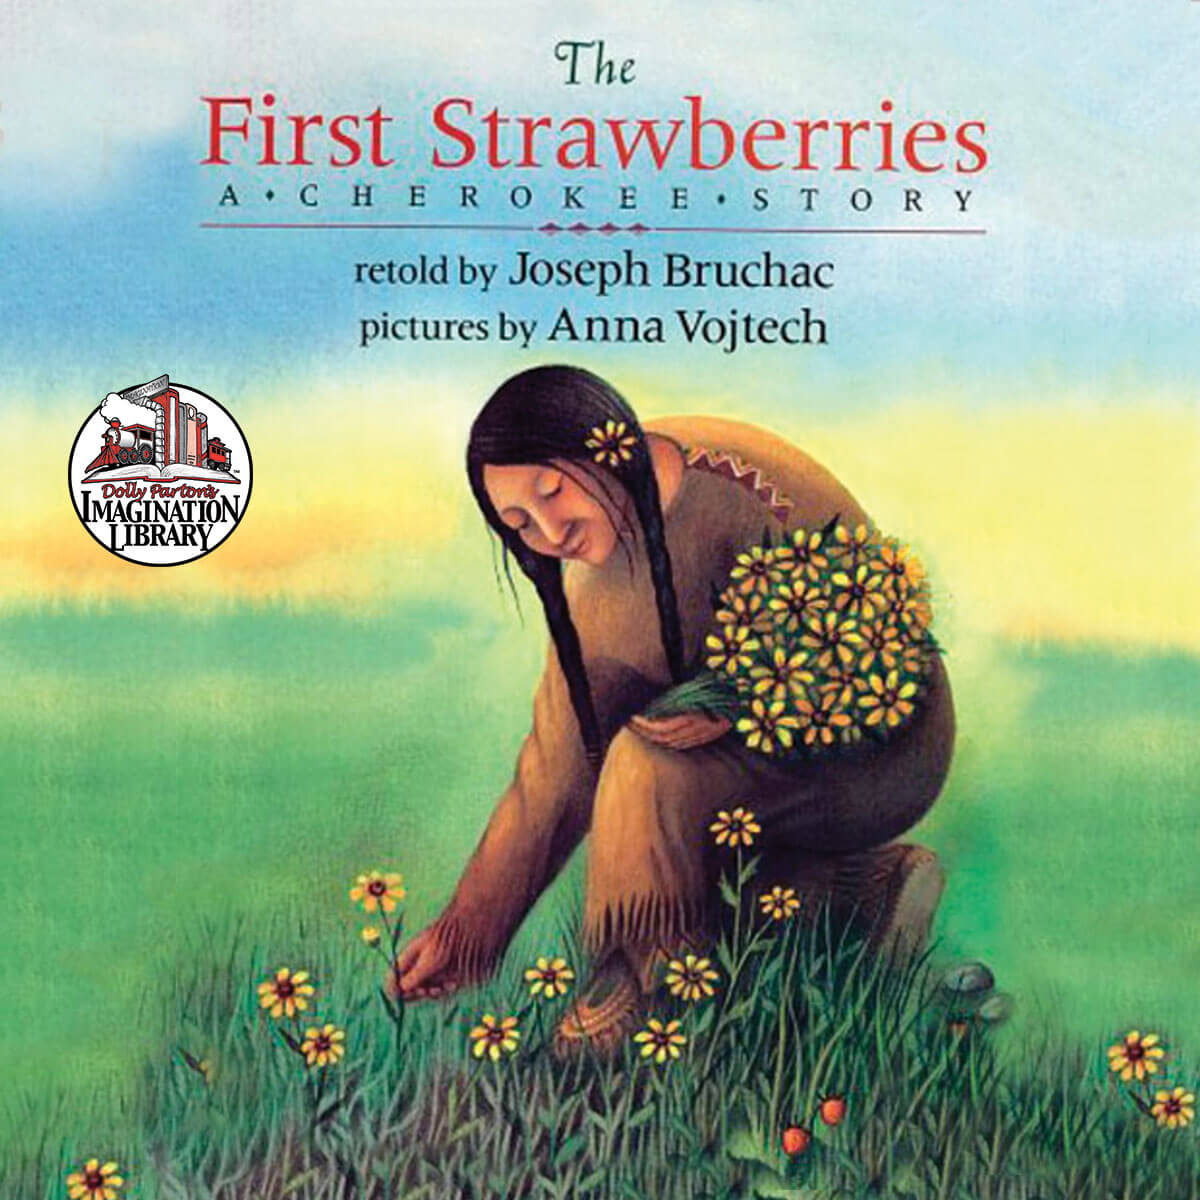 The First Strawberries - Dolly Parton's Imagination Library